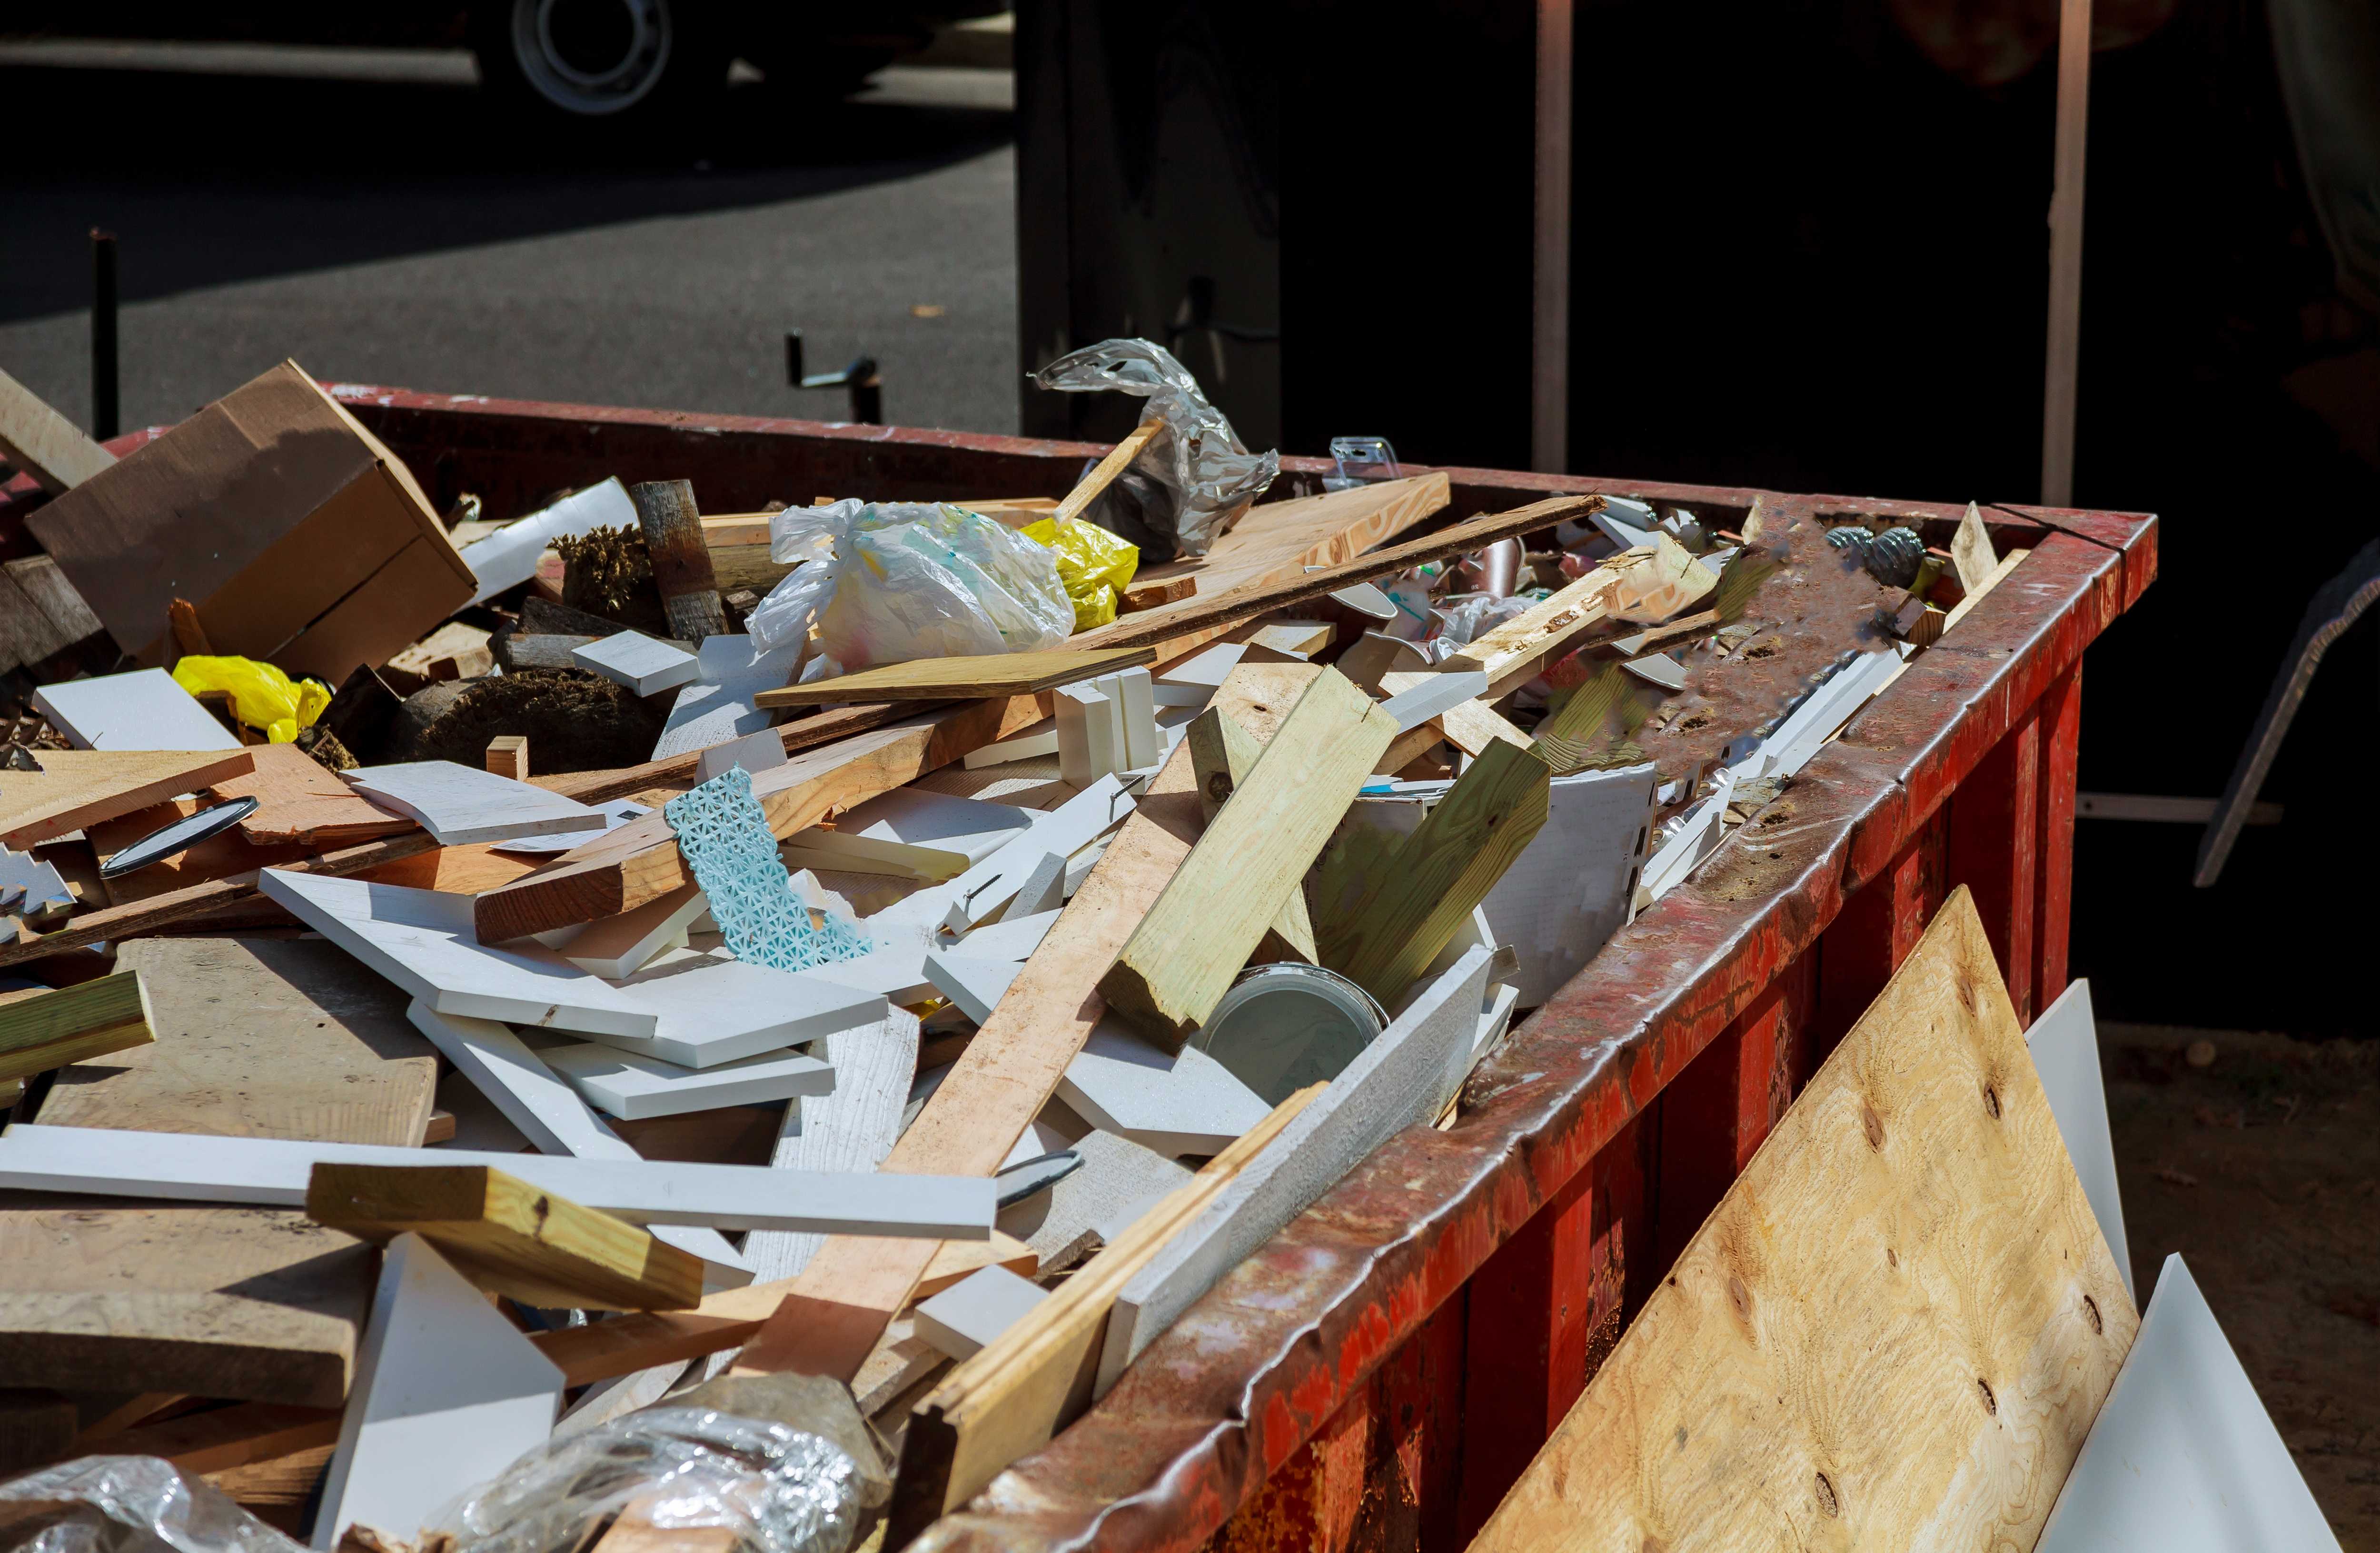 Local Skip Hire Services in Notting Hill